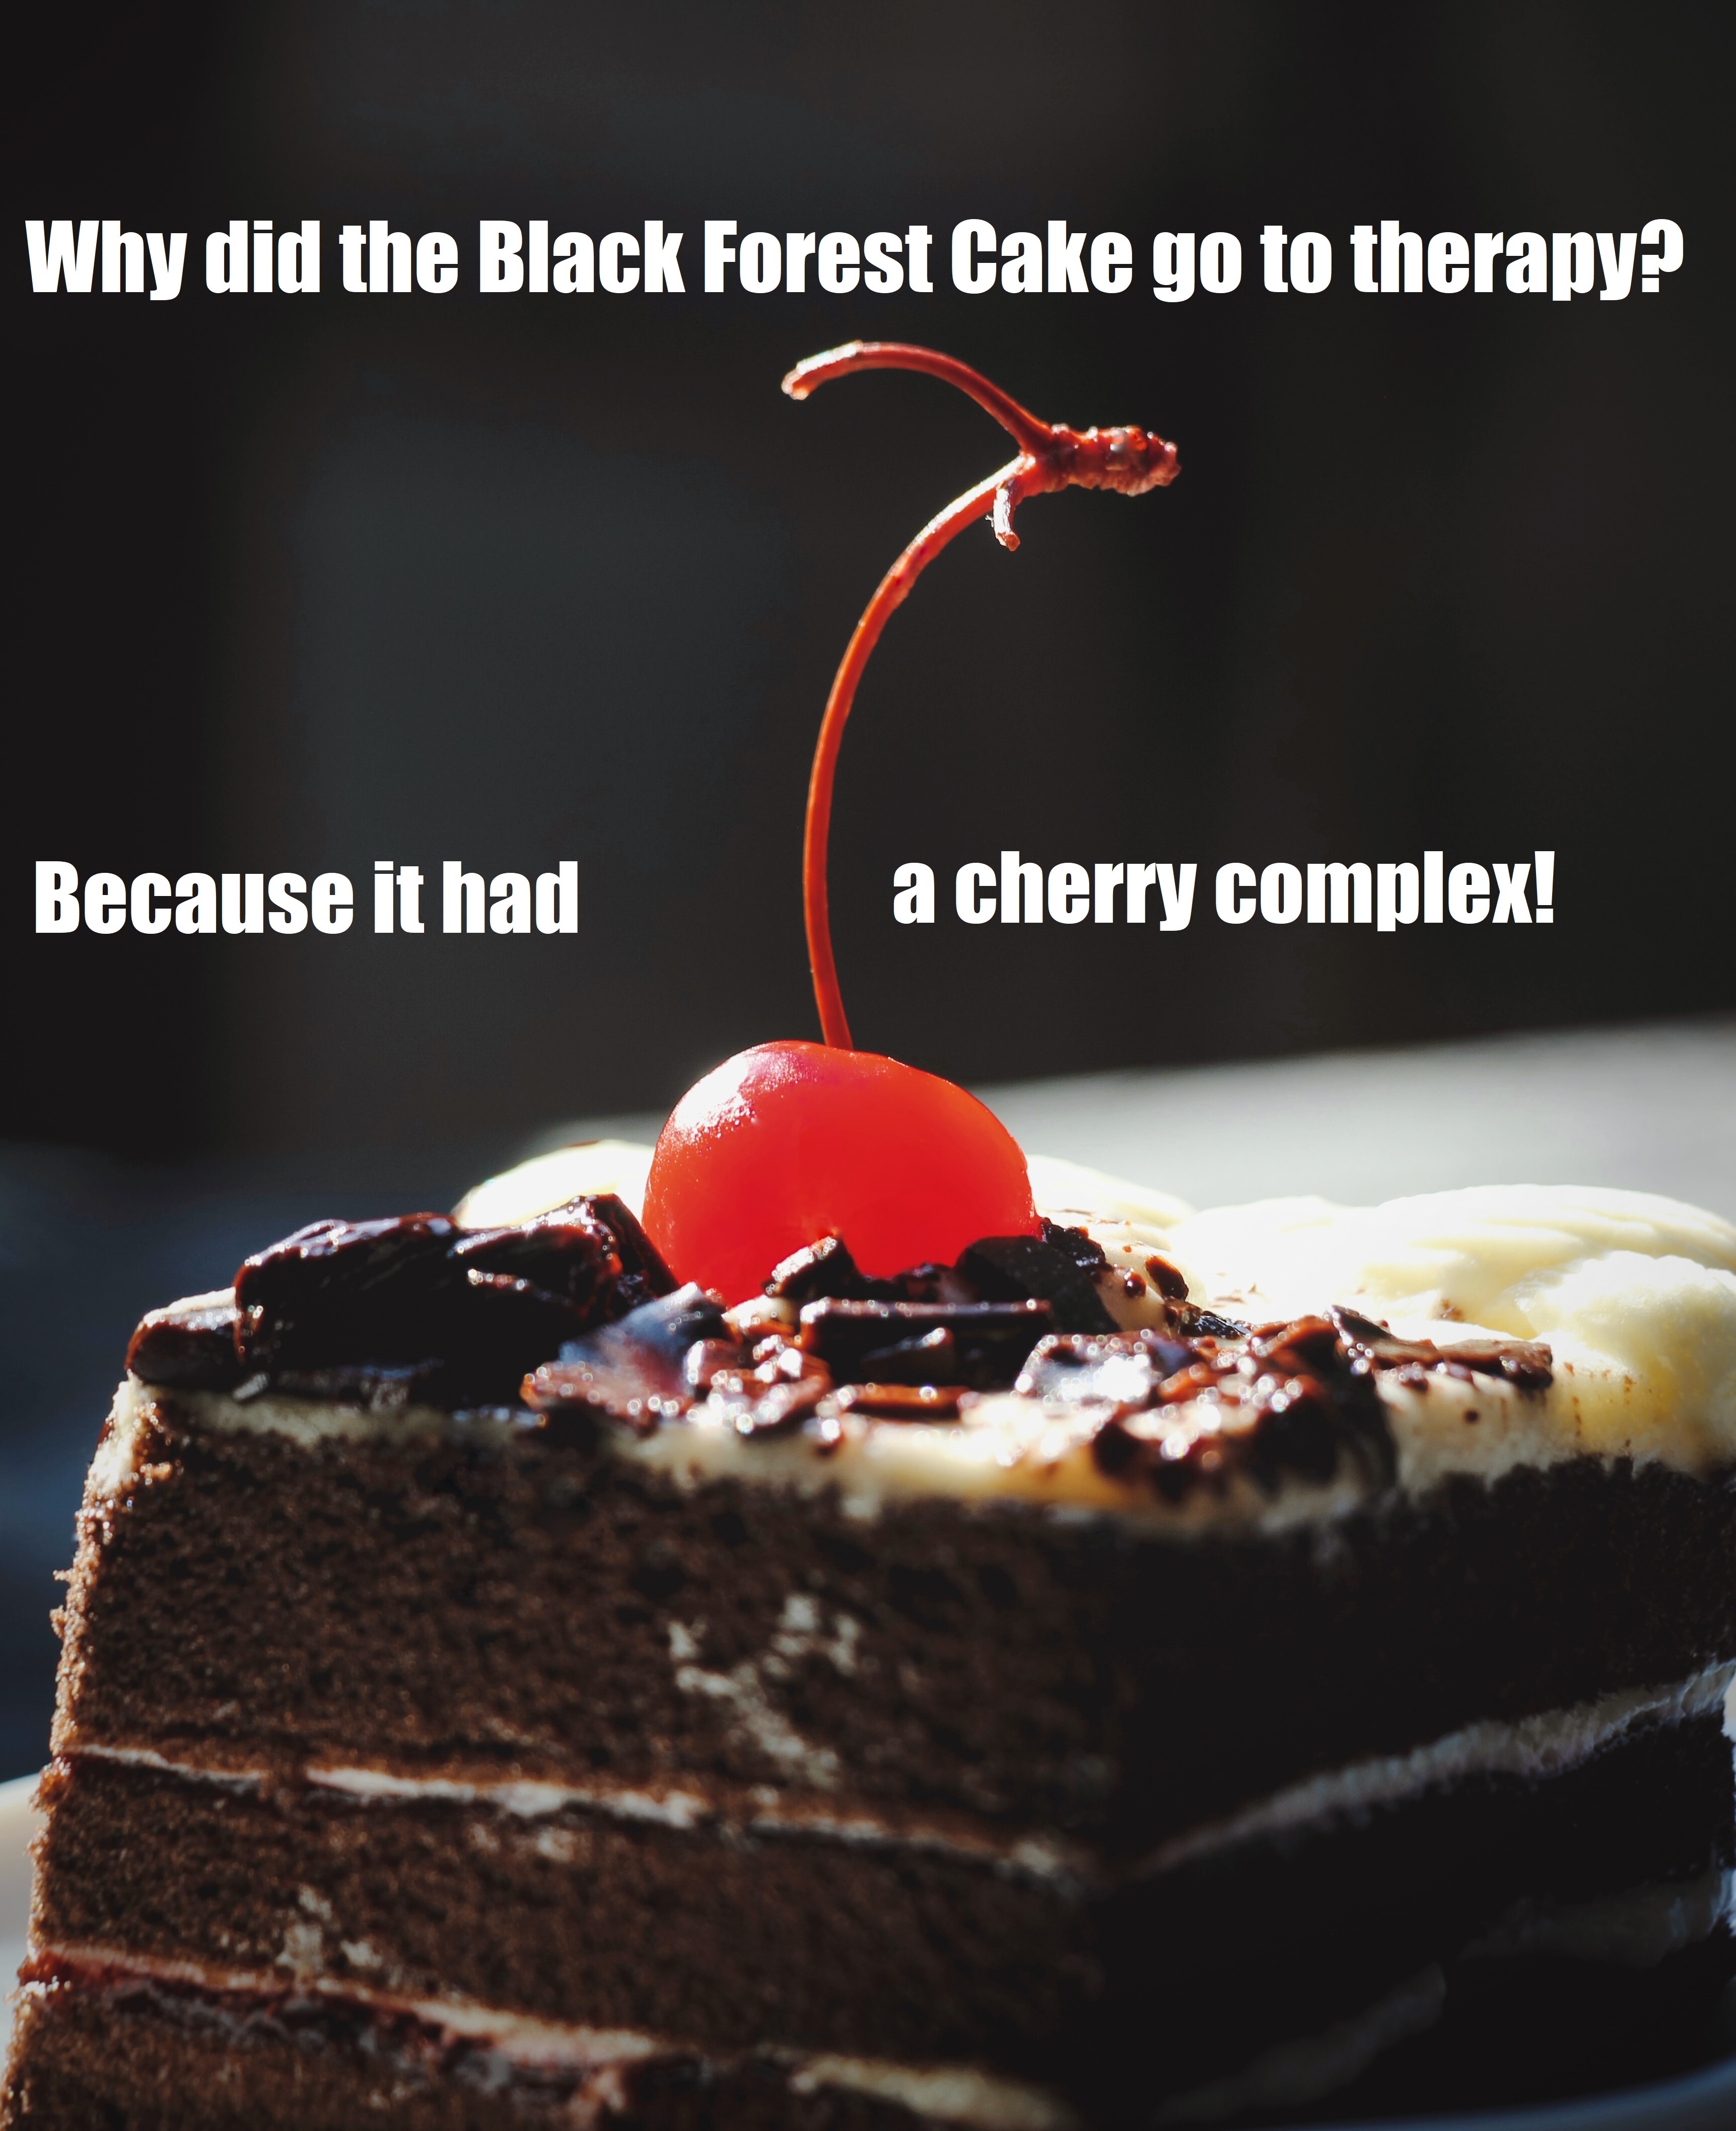 Why did the Black Forest Cake go to therapy?